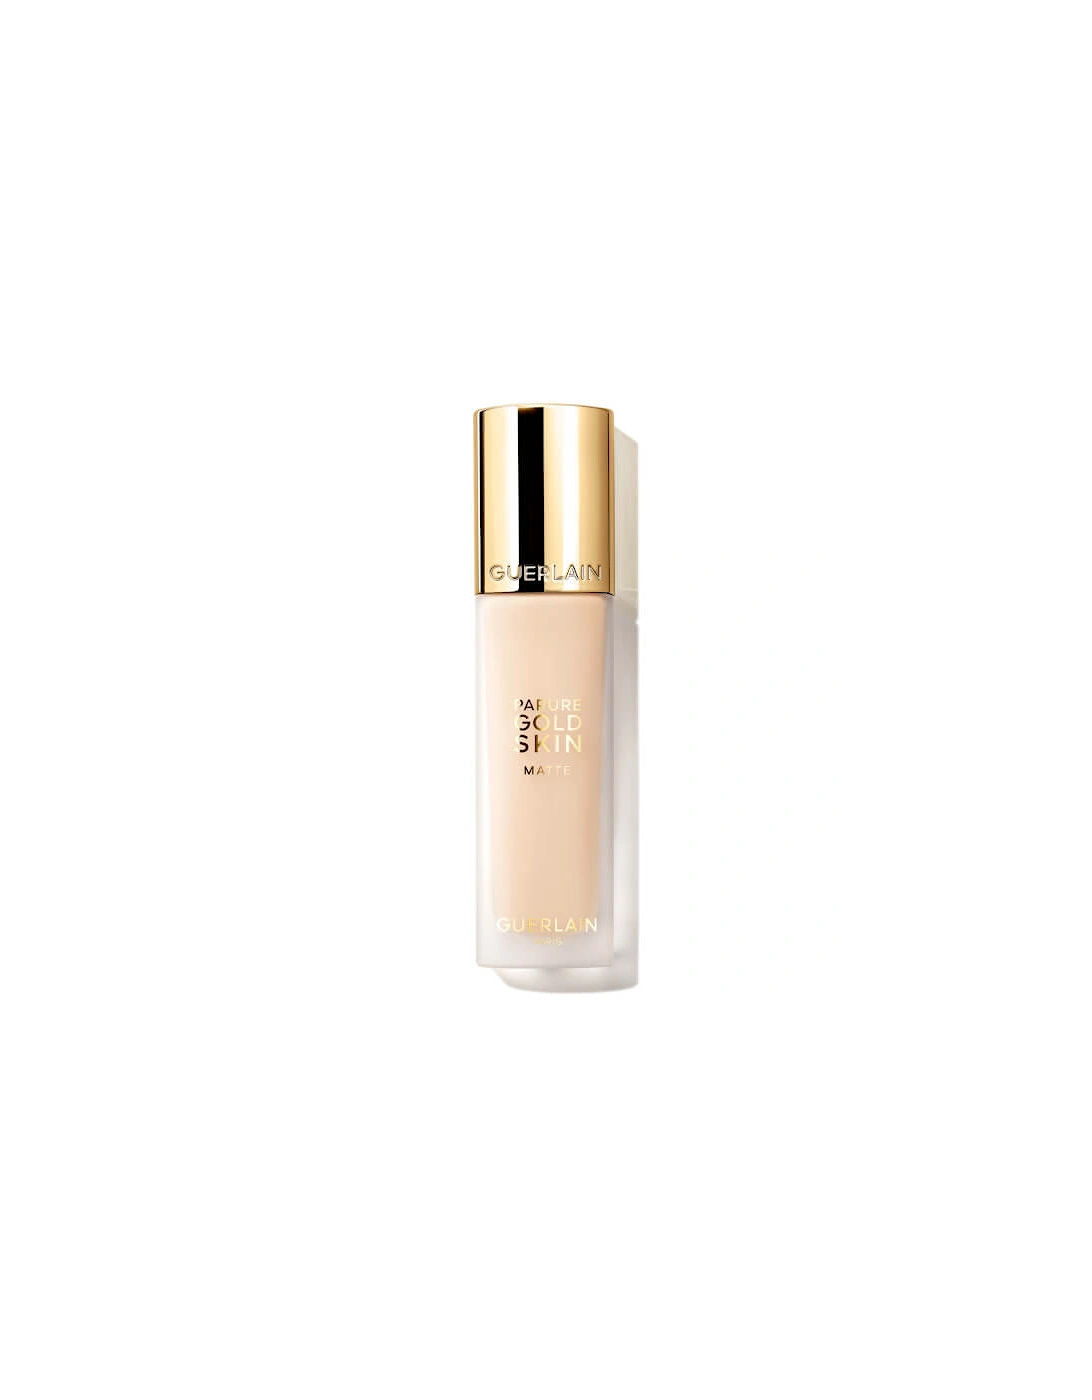 Parure Gold Skin 24H No-Transfer High Perfection Foundation - 1W Warm / Doré, 2 of 1